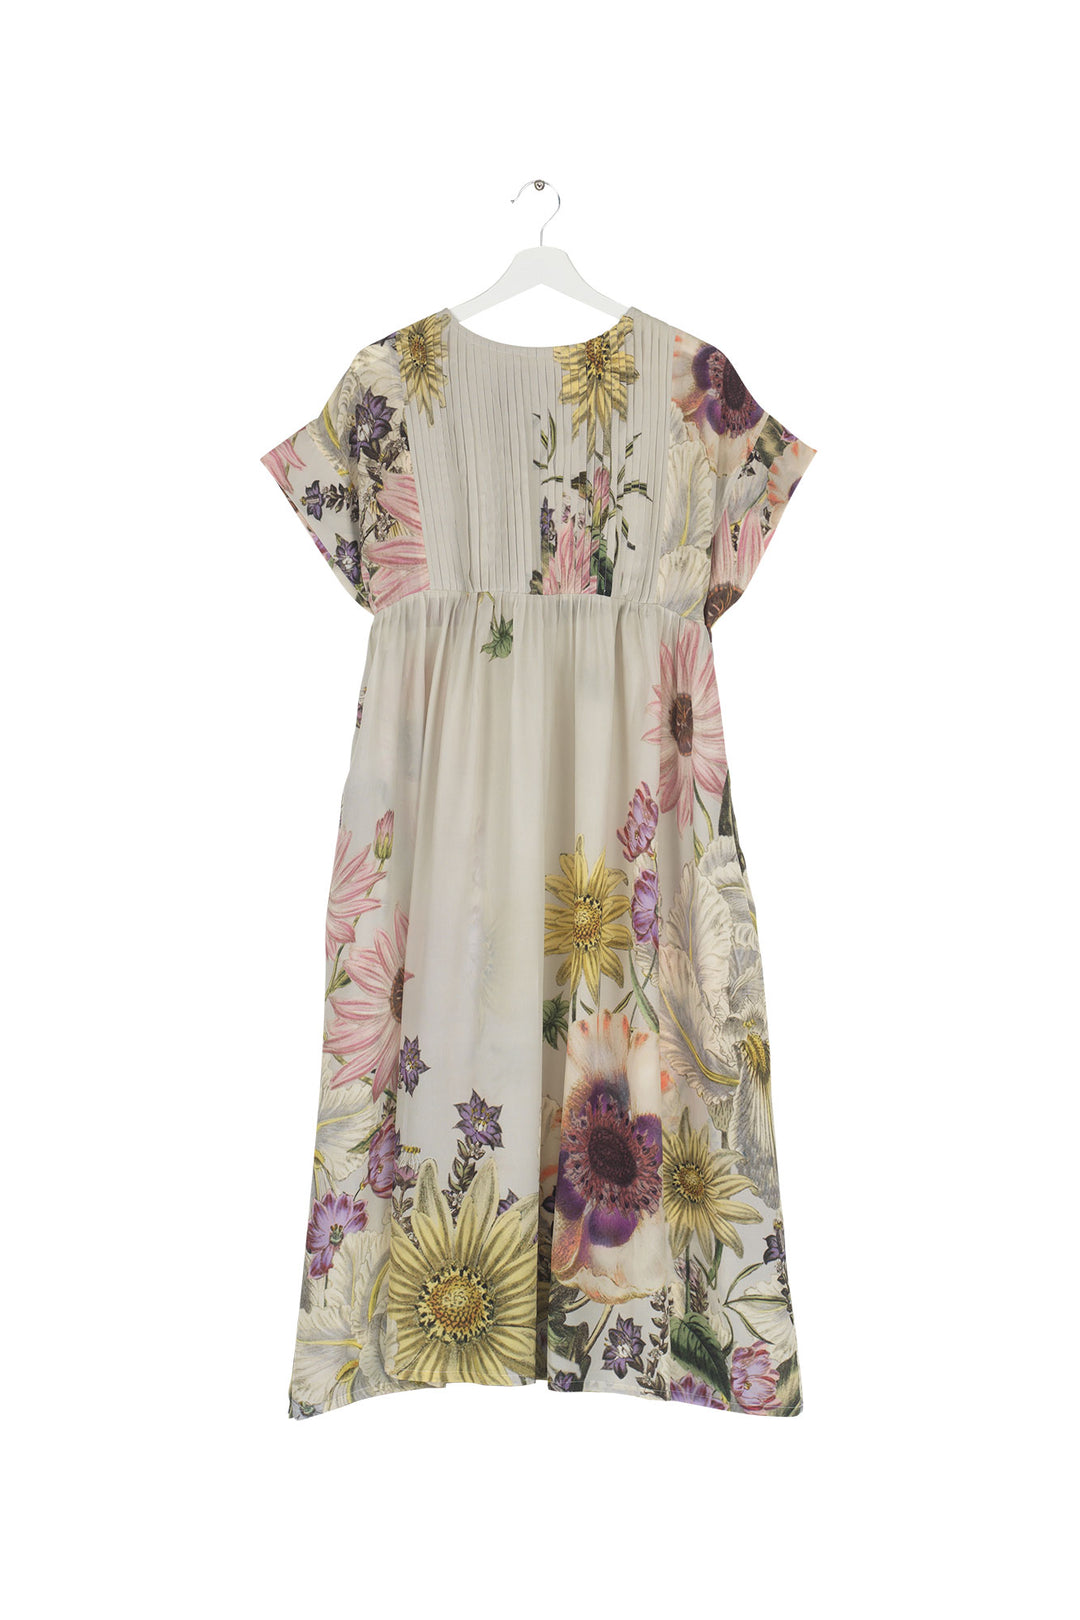 Women's short sleeve pleated dress in stone with daisy floral print by One Hundred Stars